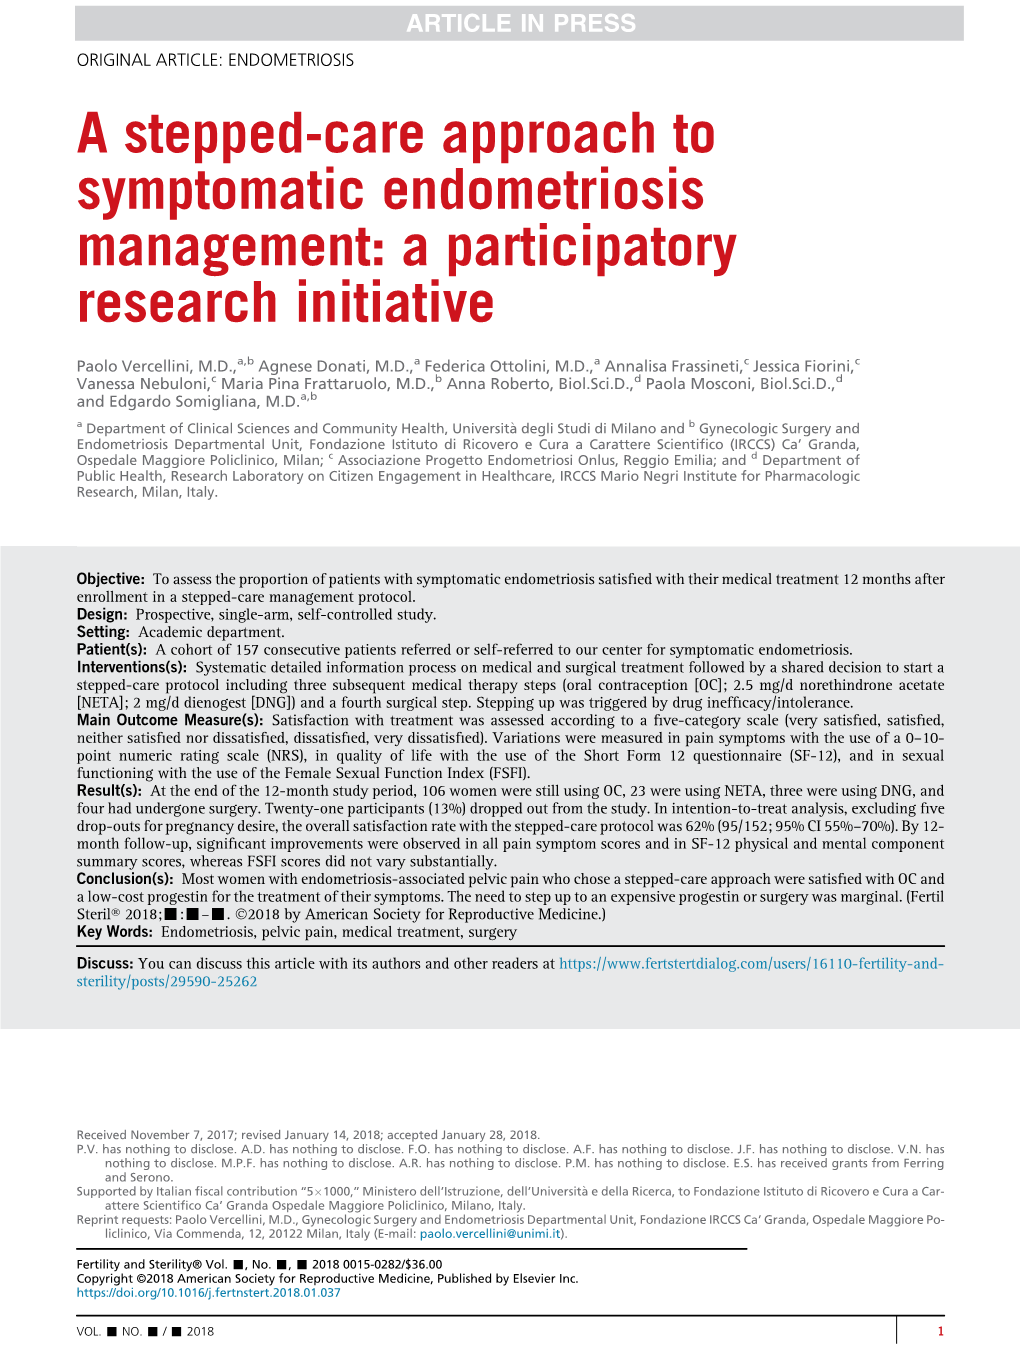 A Stepped-Care Approach to Symptomatic Endometriosis Management: a Participatory Research Initiative